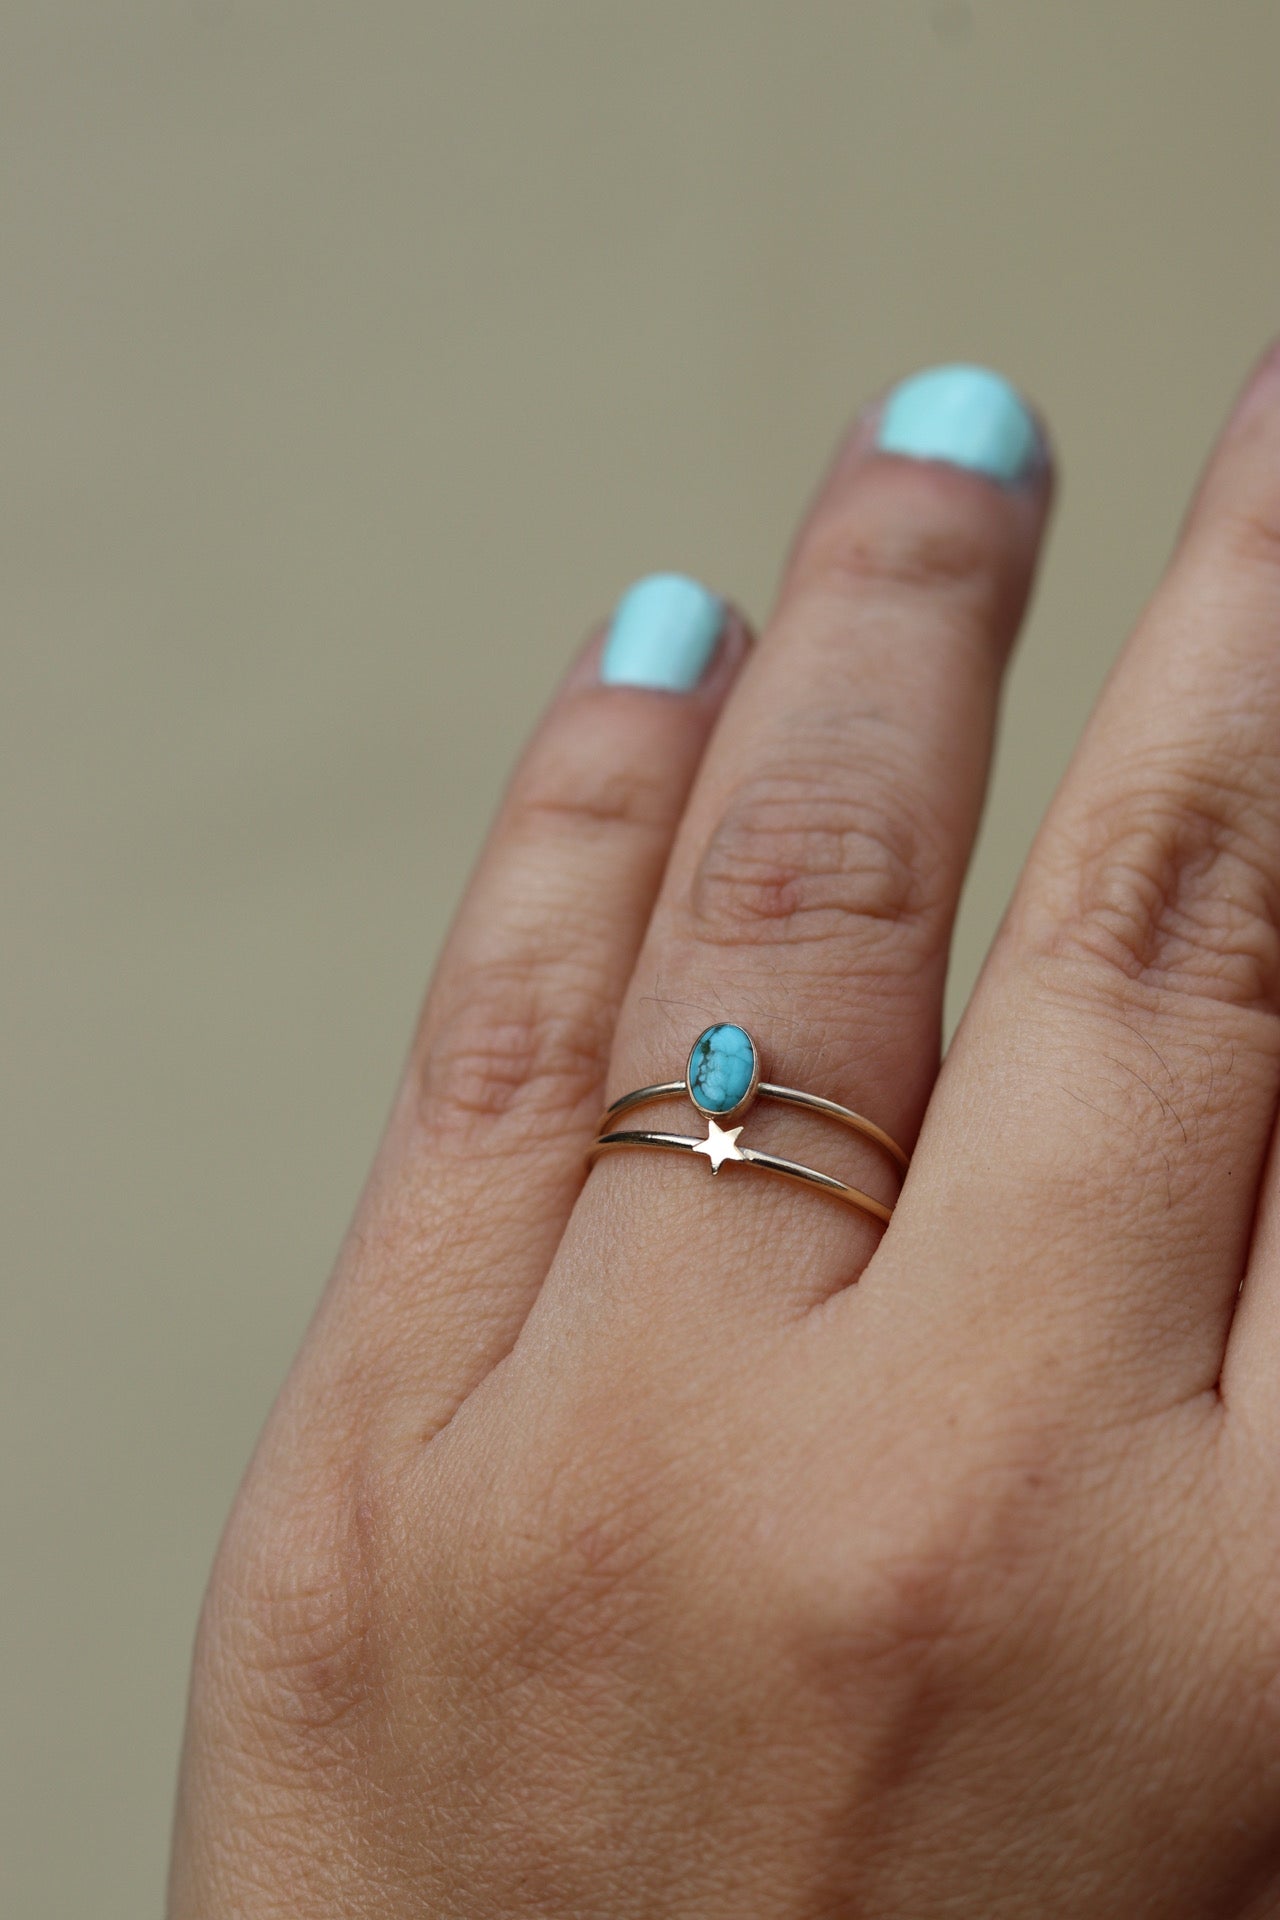 Gold Star stacker ring - size 9